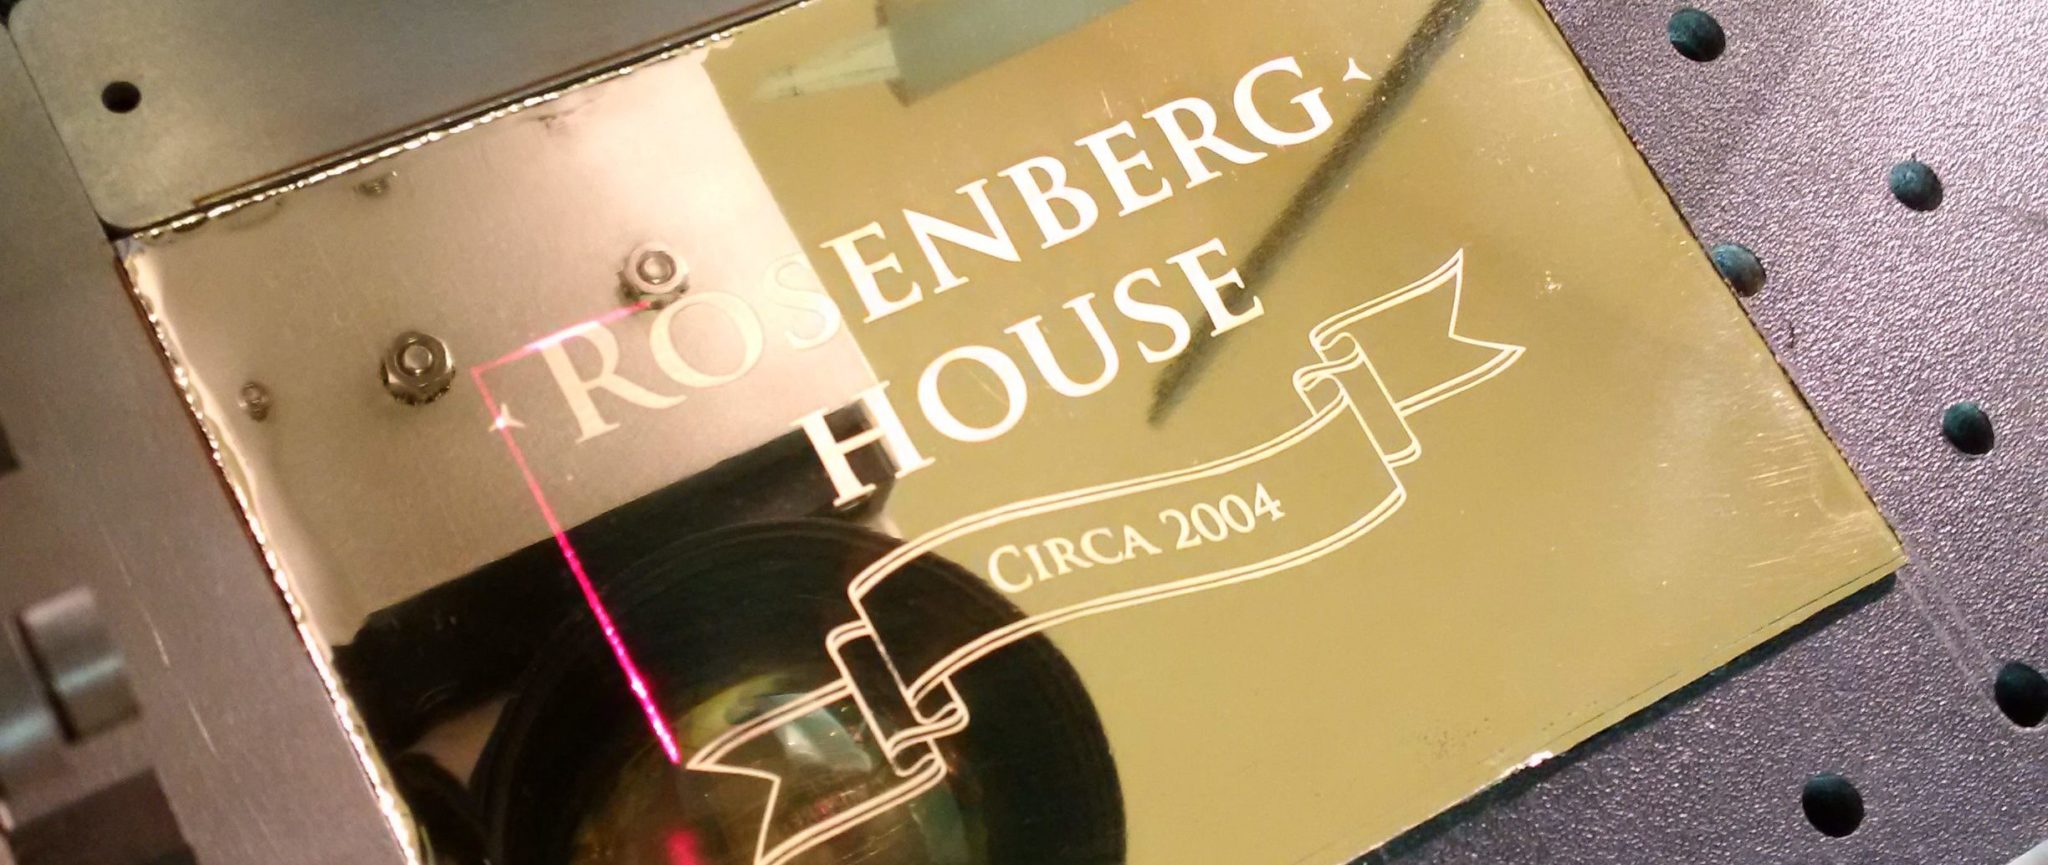 Engraved Metal Labels: Laser Etching Gold-Colored Metal. Engraving Reads "Rosenberg House Circa 2004" and is extremely neatly engraved